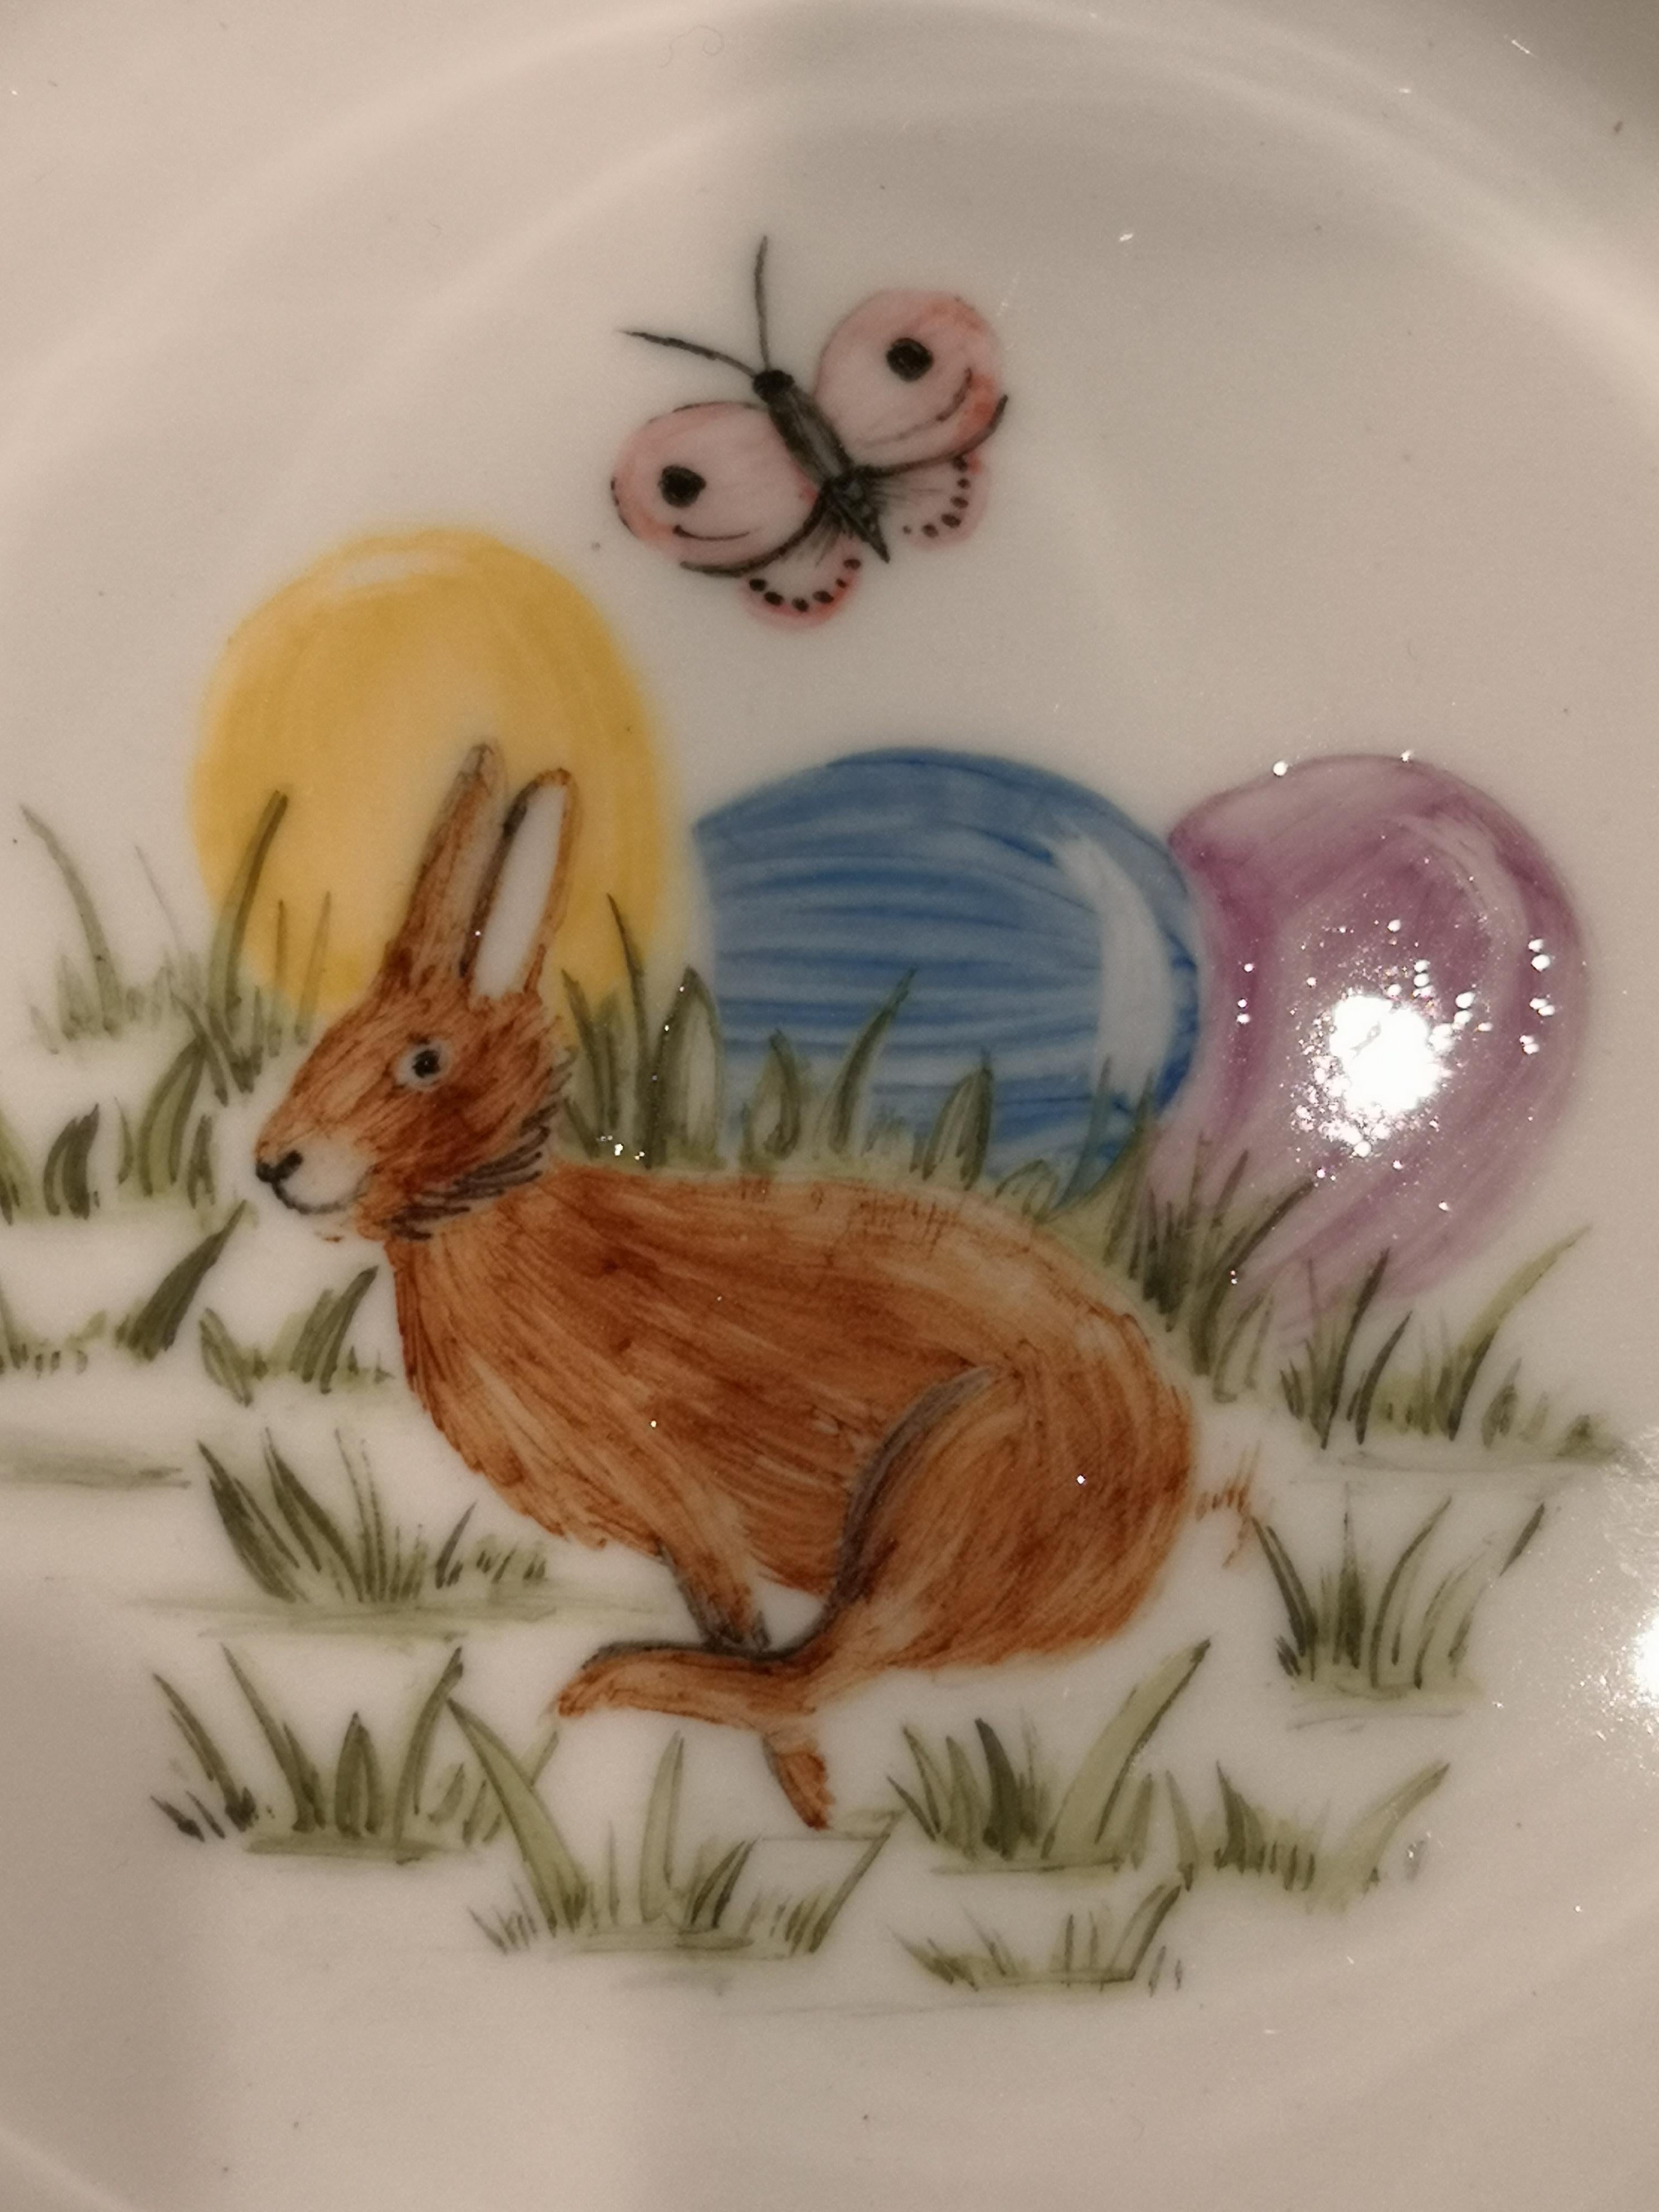 Set of two completely handmade and hands-free painted porcelain bowls with a Easter decor. Rimmed with a fine 24-carat gold line. Handmade in Bavaria/Germany by Sofina Porcelain.